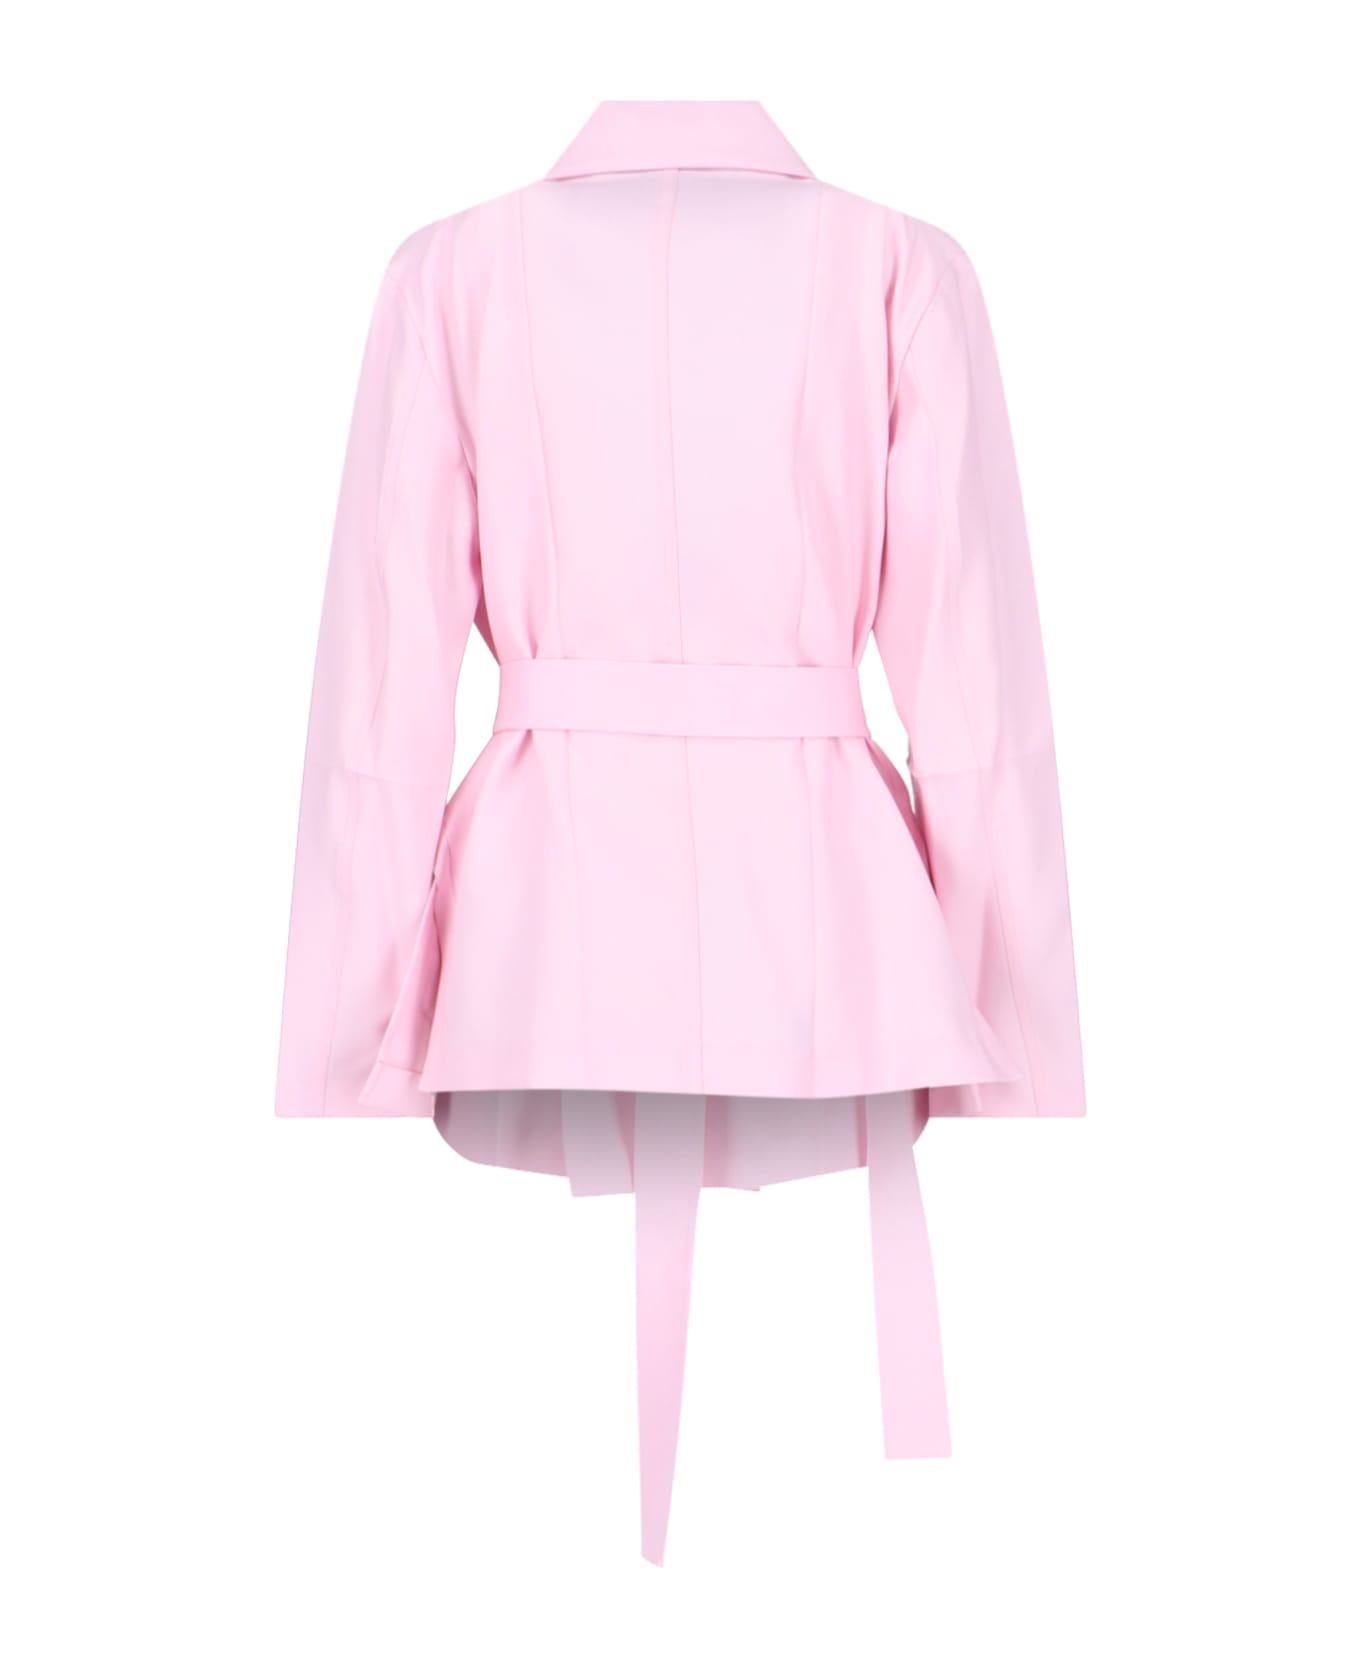 Setchu 'enrico' Double-breasted Blazer - Pink